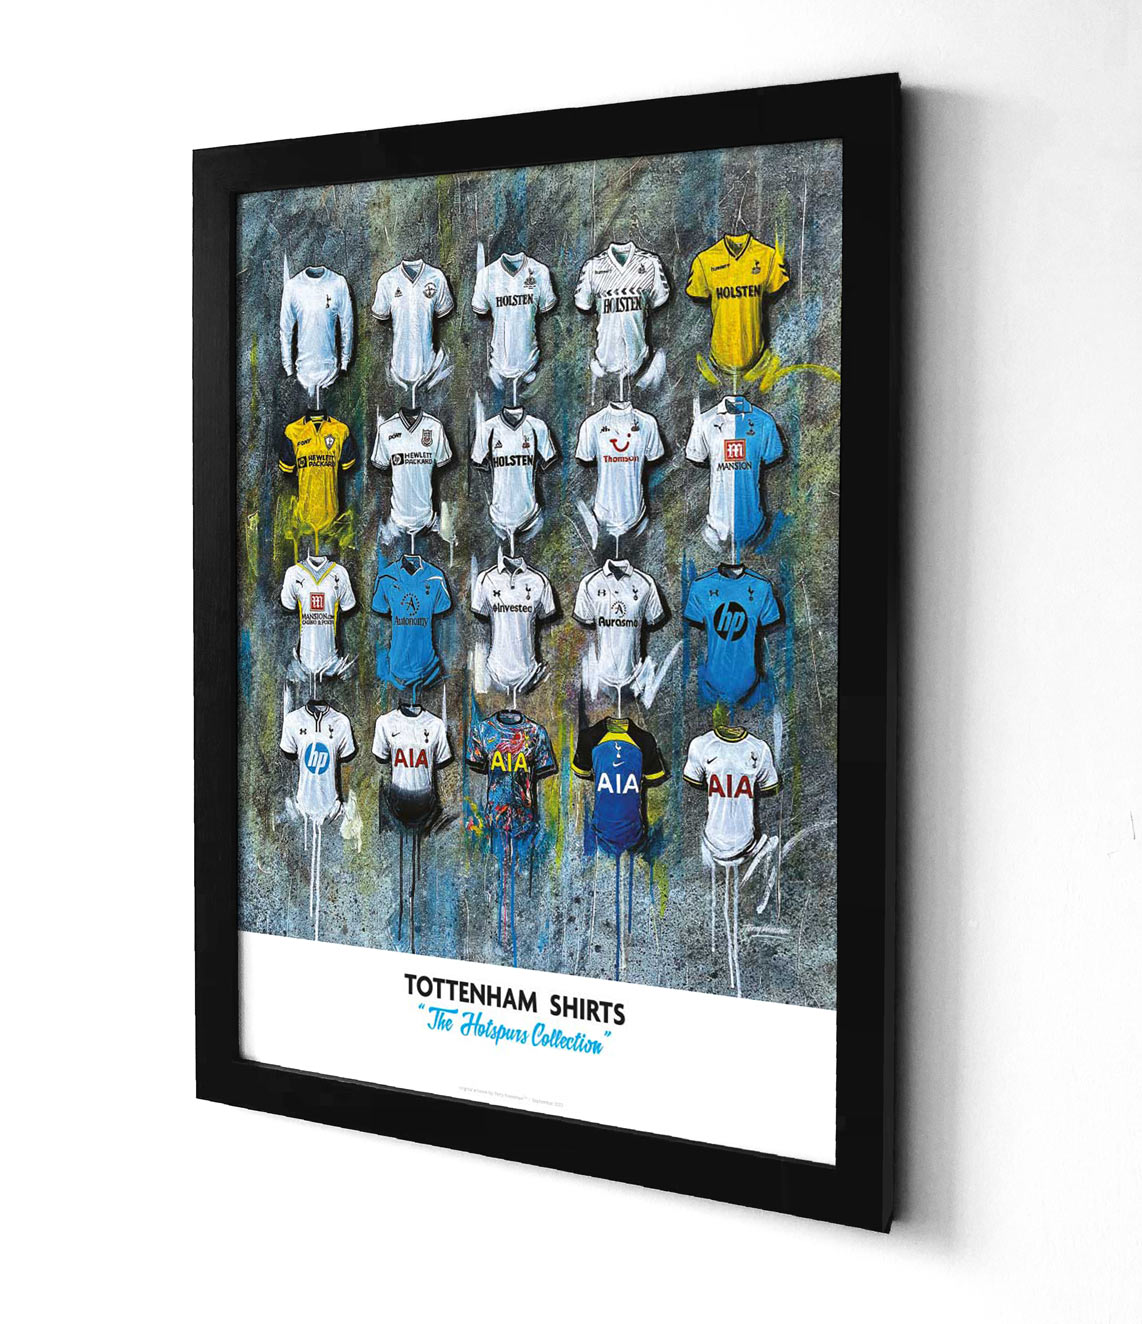 A limited edition A2 print by artist Terry Kneeshaw, featuring 20 iconic jerseys from the history of the Tottenham Hotspur football team up to the year 2022. The artwork has a vintage feel, with muted colors and a slightly distressed texture. The jerseys include classic designs such as the navy blue and white striped shirt and the white shirt with a cockerel emblem, as well as recent designs. Perfect for any Spurs fan.